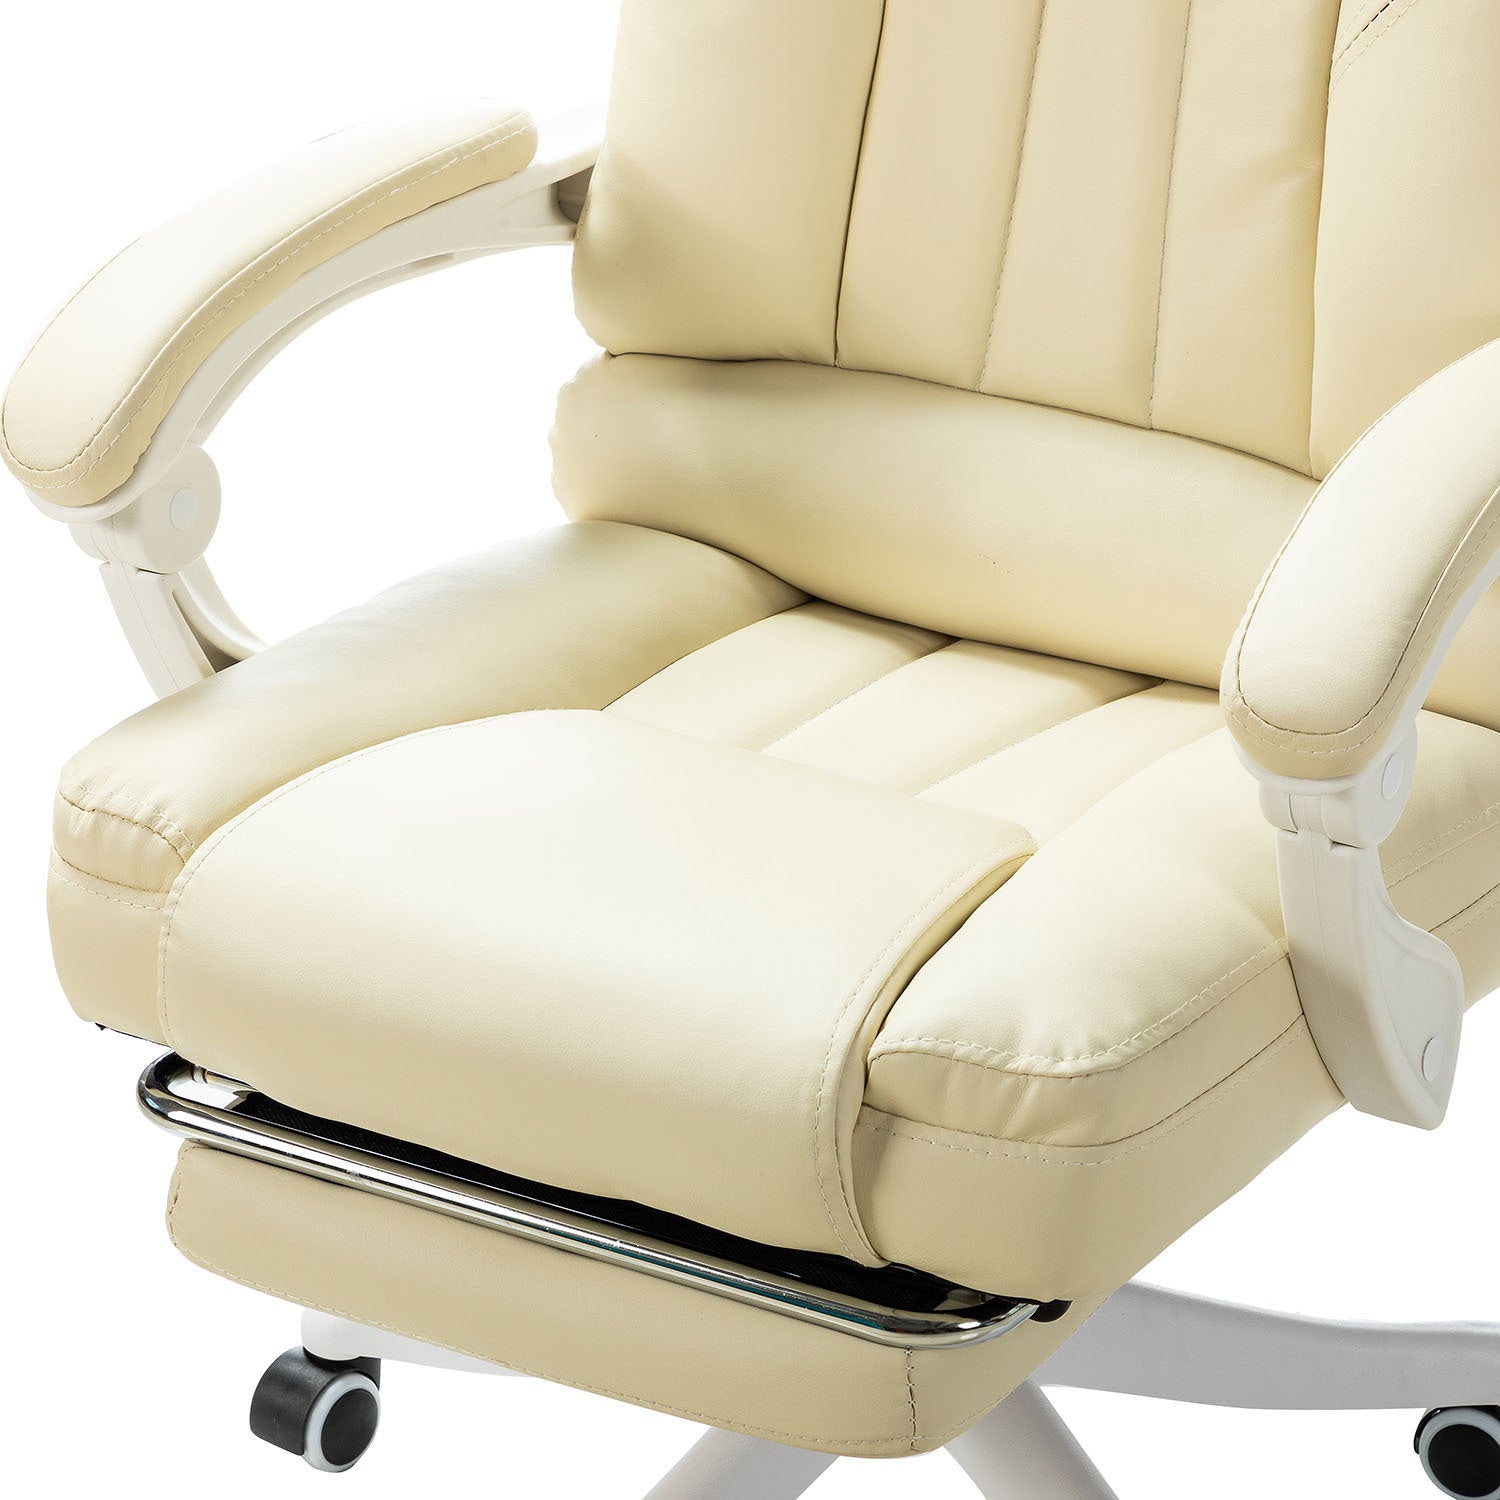 Flavia Swivel Gaming Chair with Adjustable Height (Ivory)